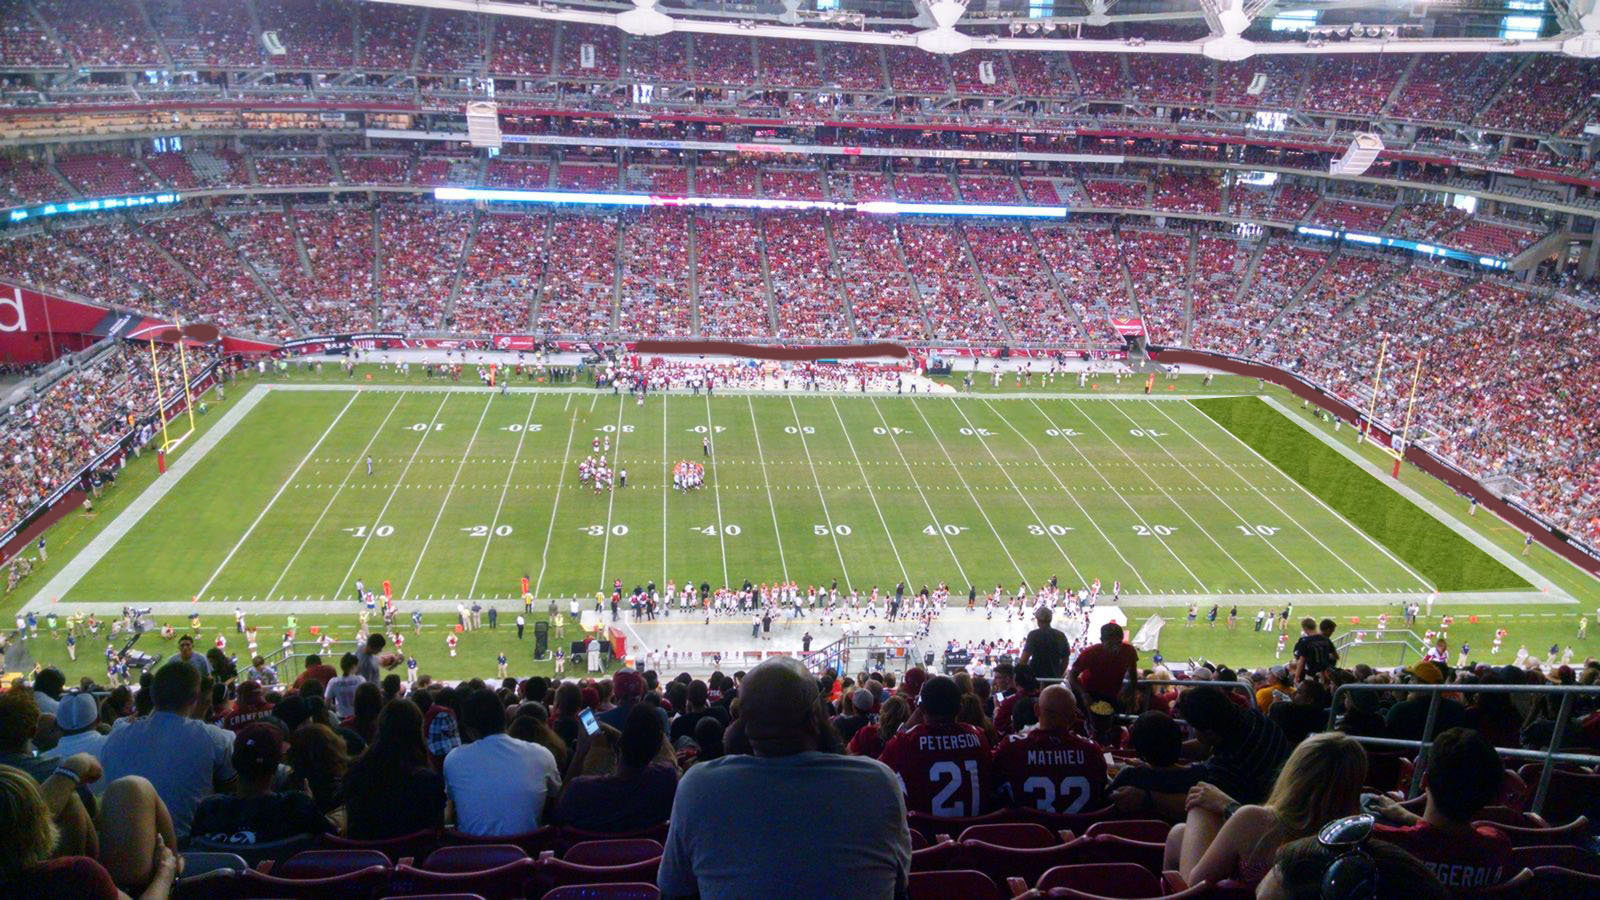 section 445, row 23 seat view  for football - state farm stadium